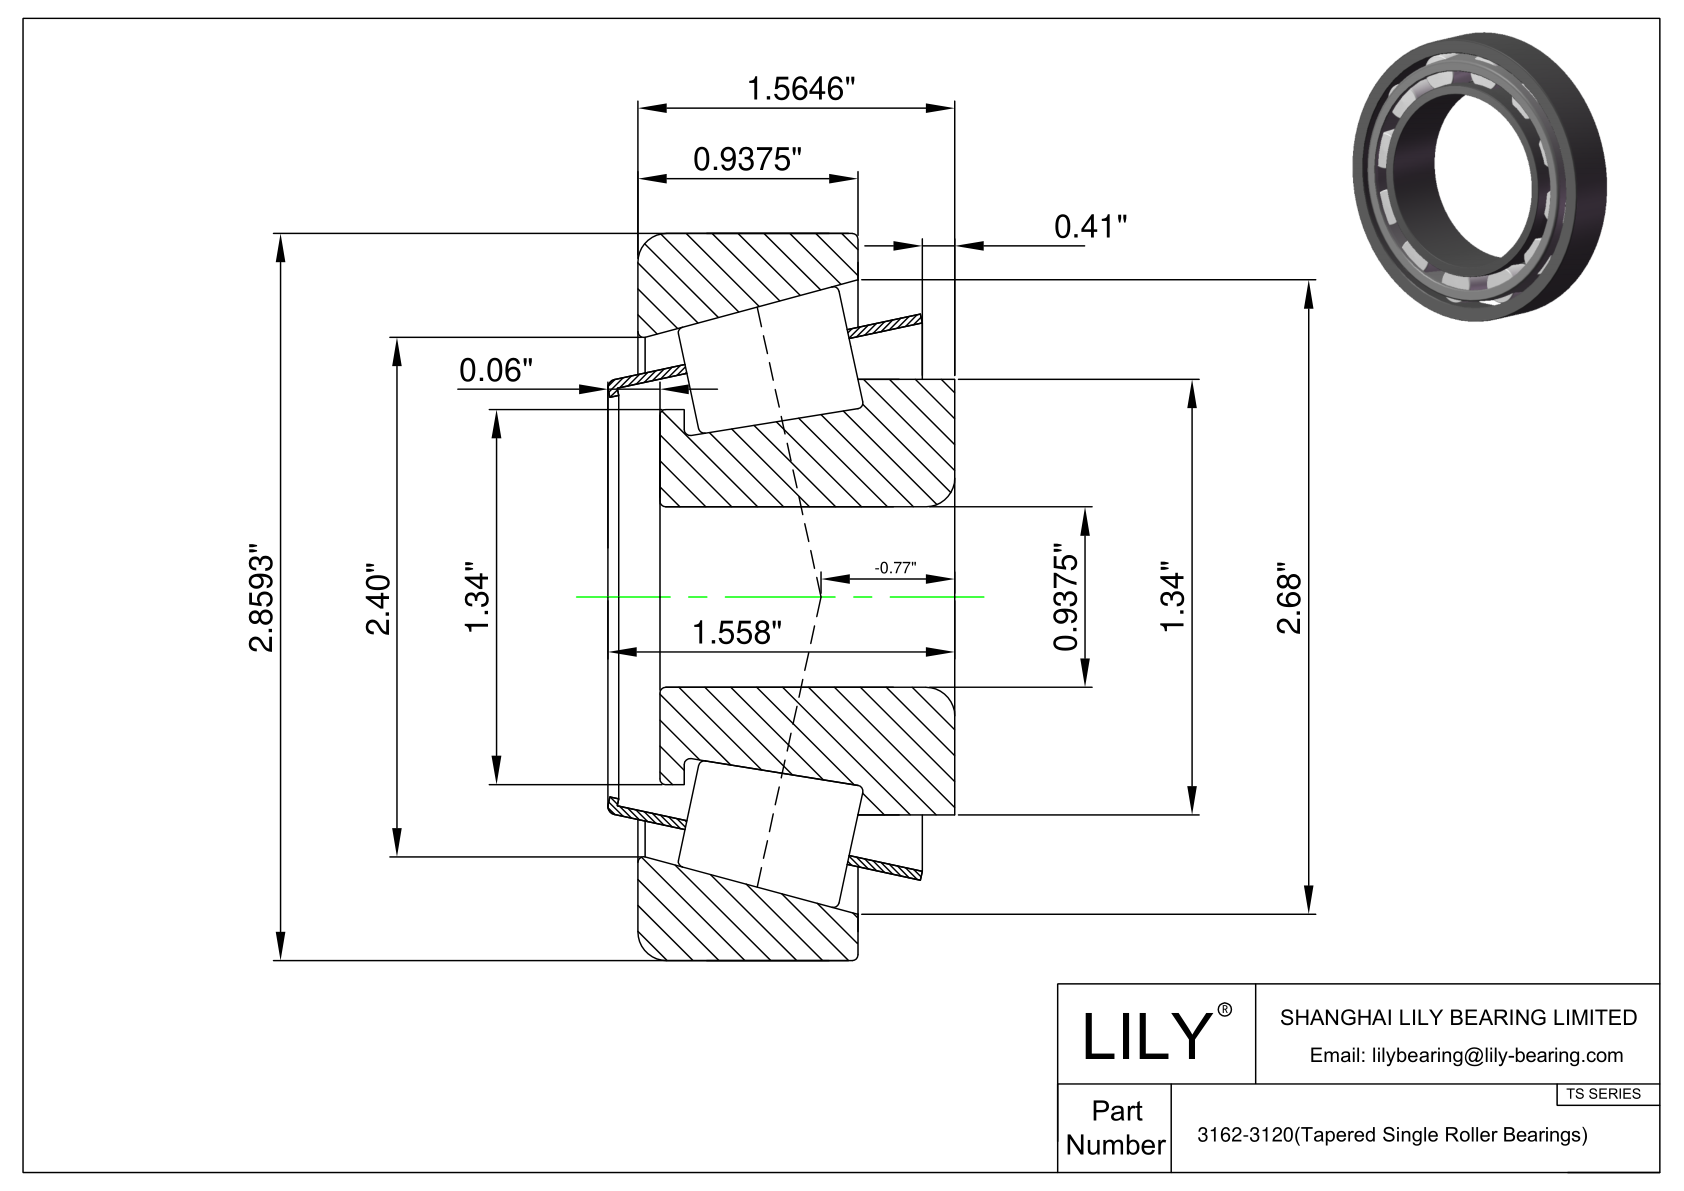 3162-3120 TS (Tapered Single Roller Bearings) (Imperial) cad drawing